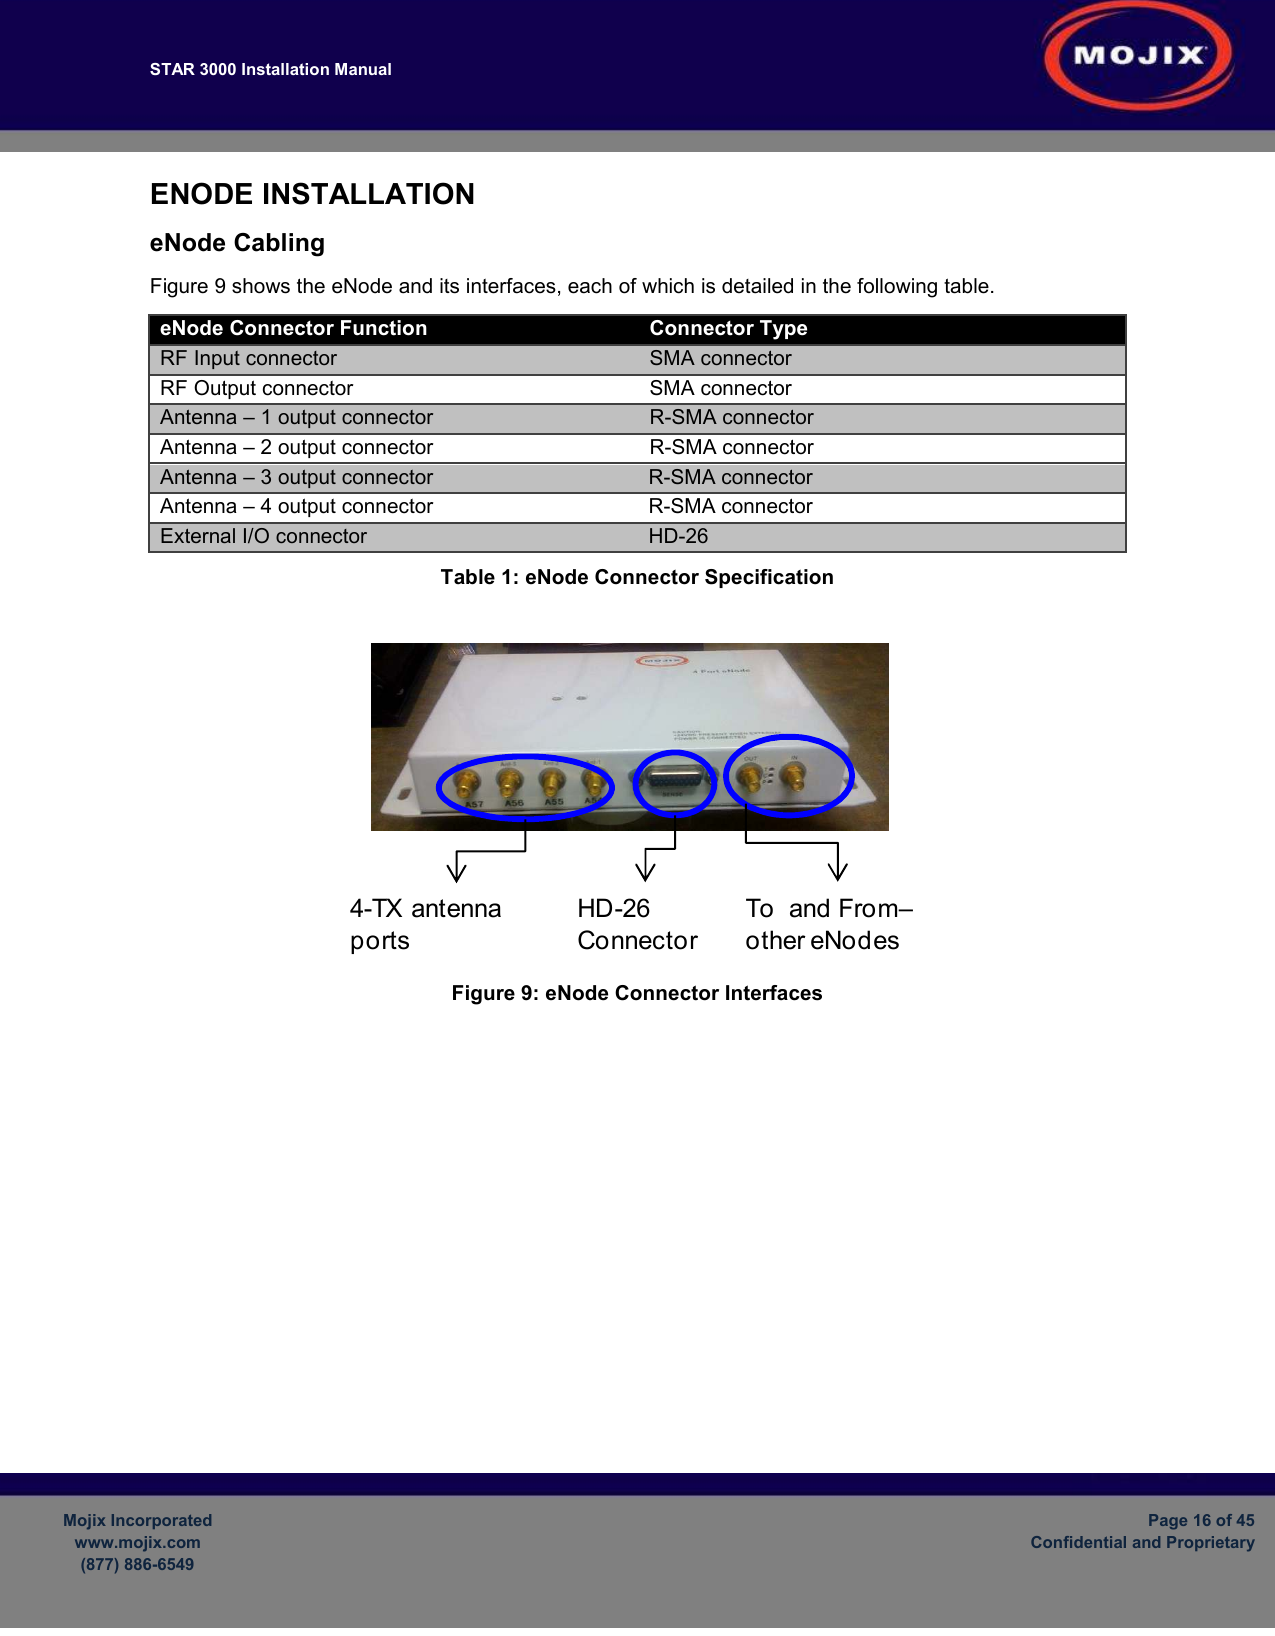 STAR 3000 Installation Manual         Mojix Incorporated www.mojix.com (877) 886-6549  Page 16 of 45 Confidential and Proprietary  ENODE INSTALLATION eNode Cabling Figure 9 shows the eNode and its interfaces, each of which is detailed in the following table.  eNode Connector Function  Connector Type RF Input connector  SMA connector RF Output connector  SMA connector Antenna – 1 output connector  R-SMA connector Antenna – 2 output connector  R-SMA connector Antenna – 3 output connector  R-SMA connector Antenna – 4 output connector  R-SMA connector External I/O connector  HD-26 Table 1: eNode Connector Specification  4-TX antenna portsTo  and From–other eNodes HD-26 Connector Figure 9: eNode Connector Interfaces 